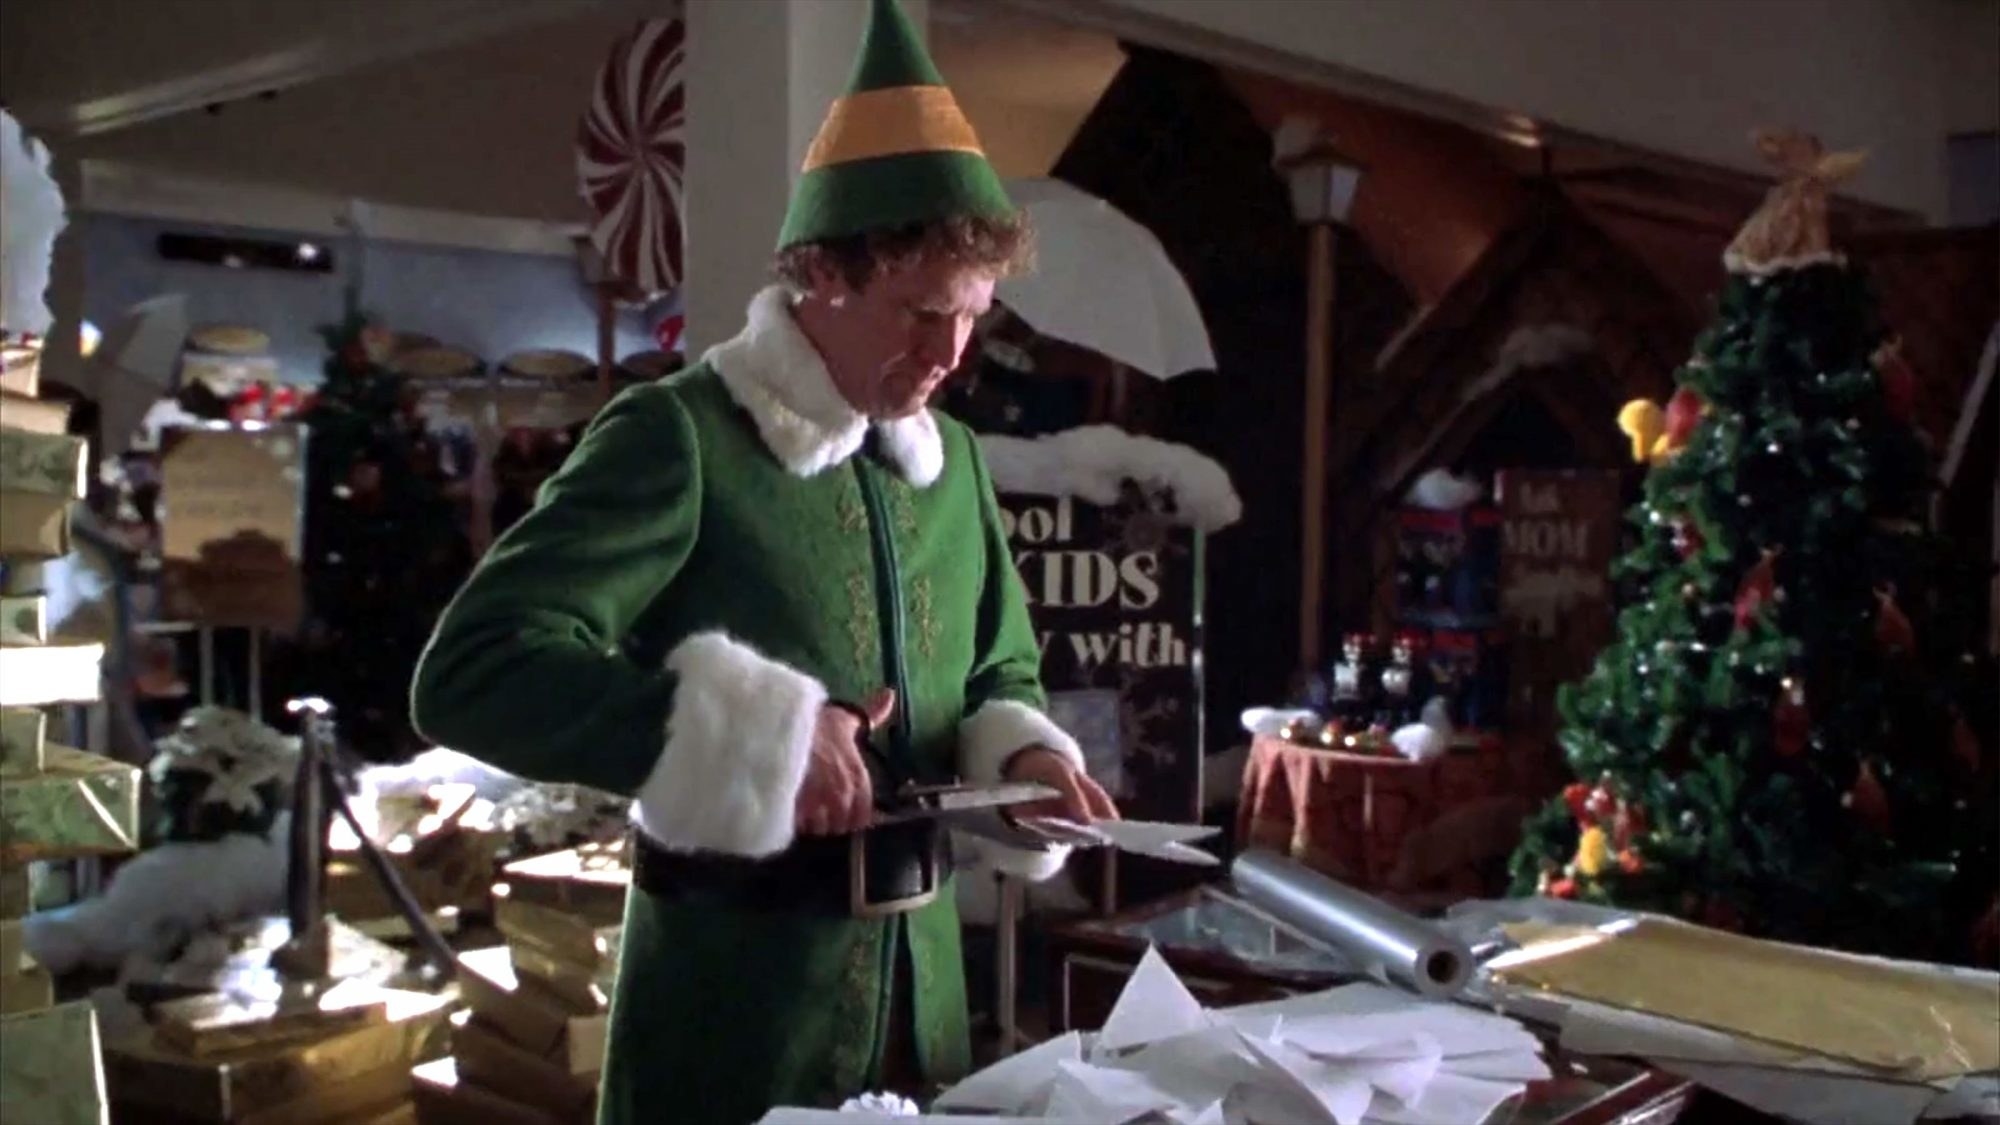 An adult elf cutting into wrapping paper